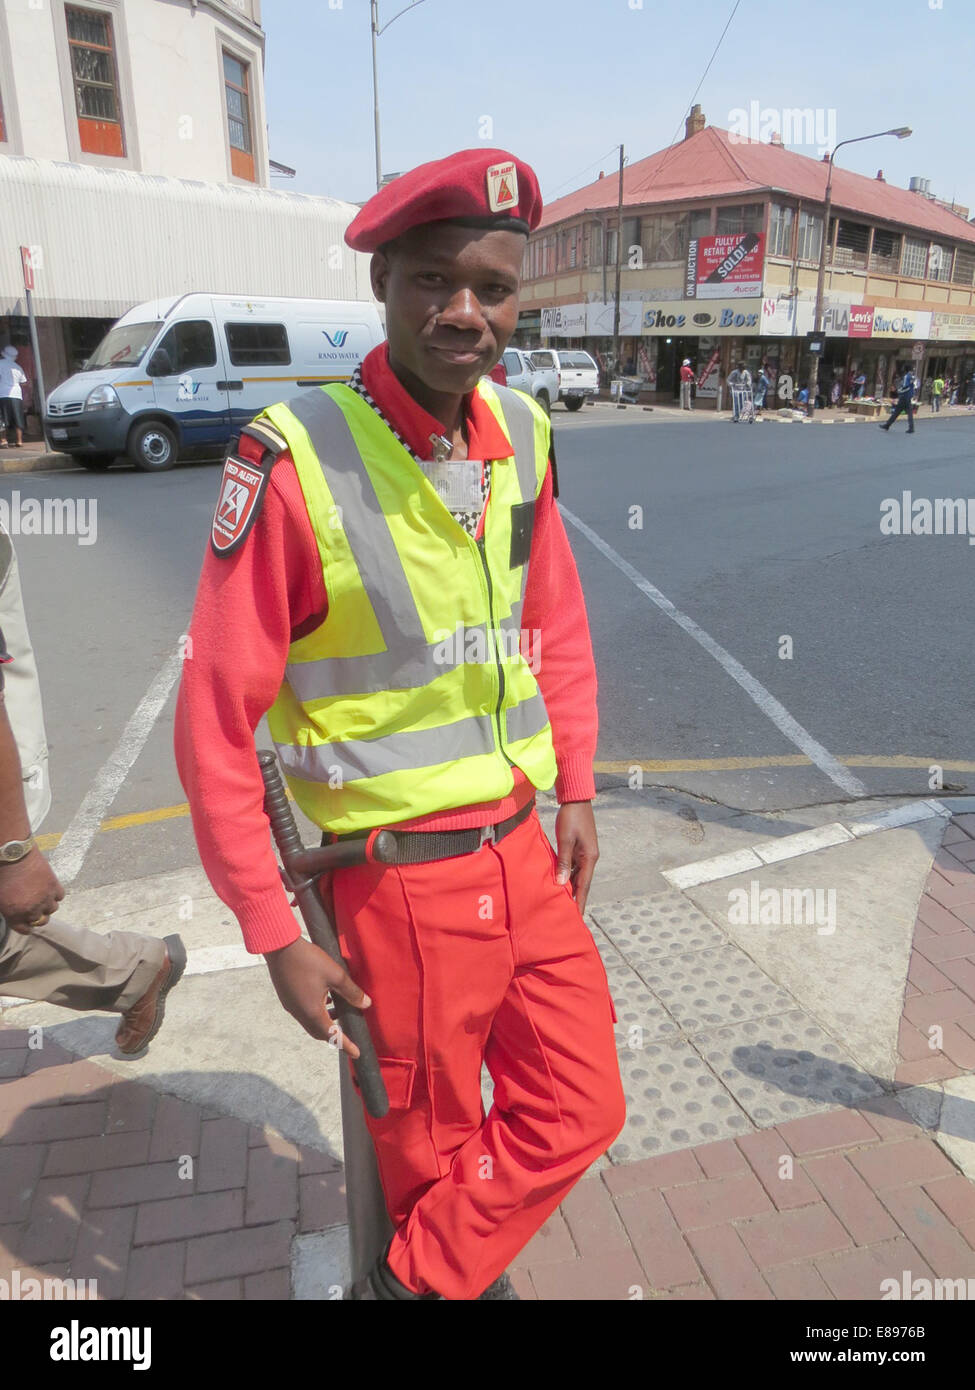 PRIVATE SECURITY GUARD from the Red Alert Company in Johannesburg, South Africa. Photo Tony Gale Stock Photo